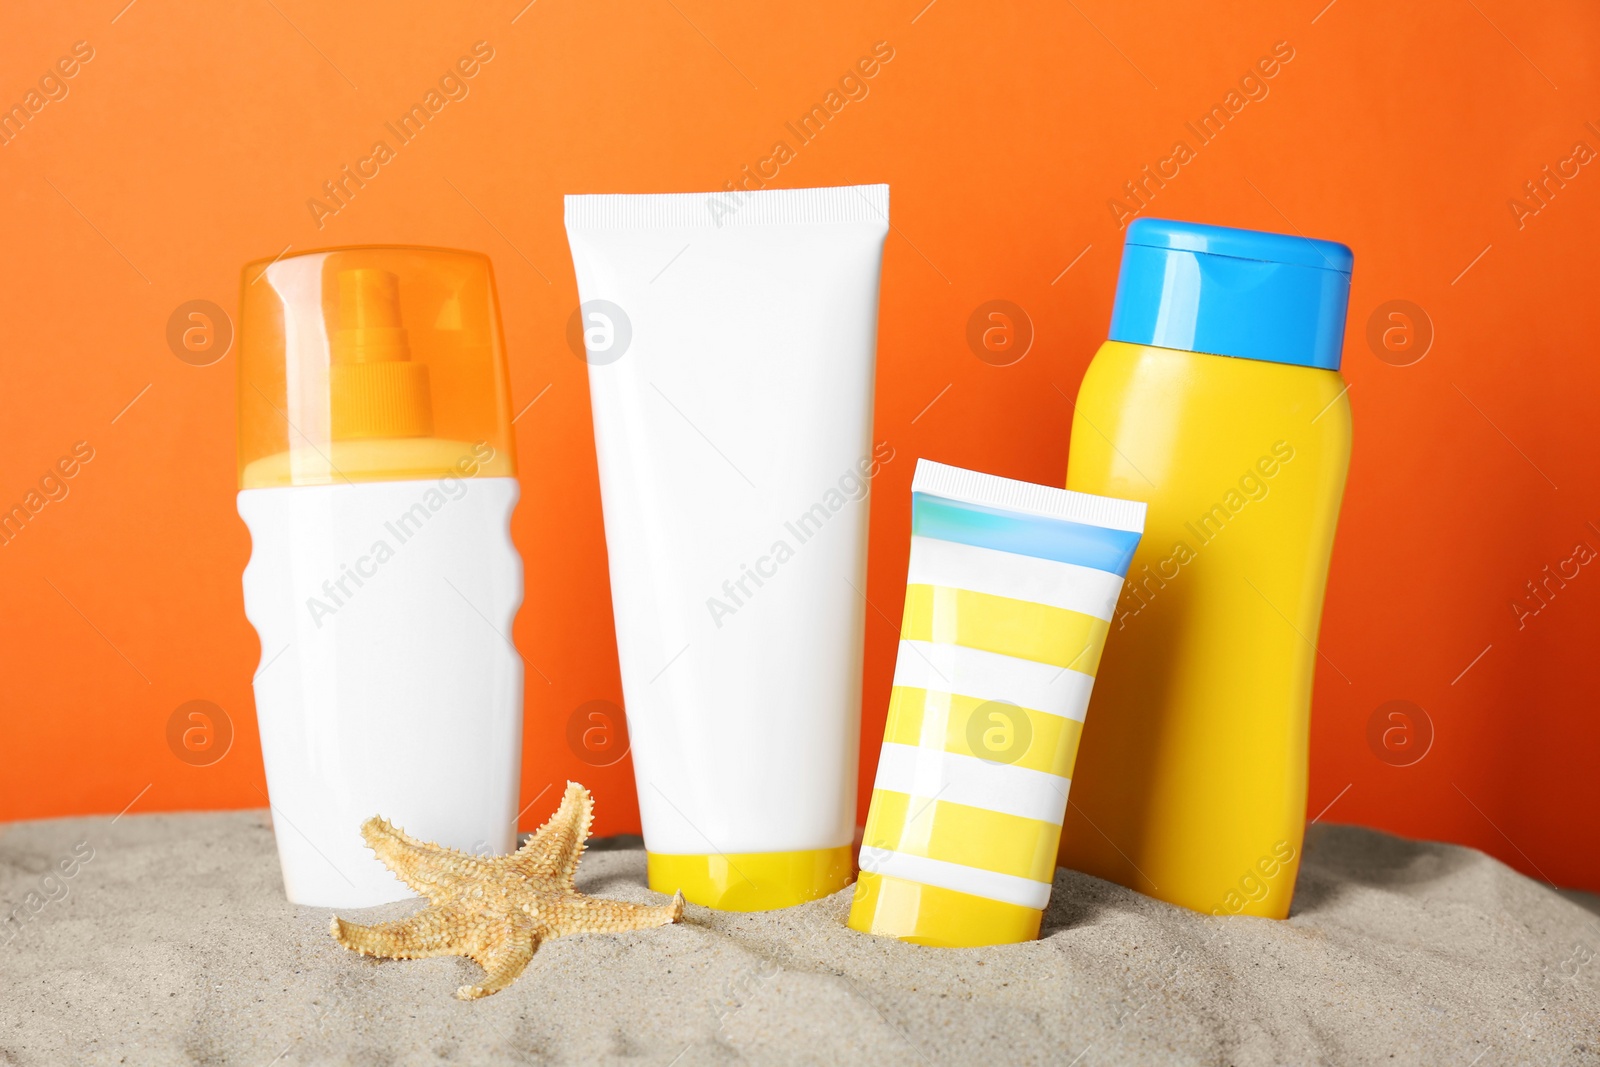 Photo of Different suntan products and starfish on sand against orange background